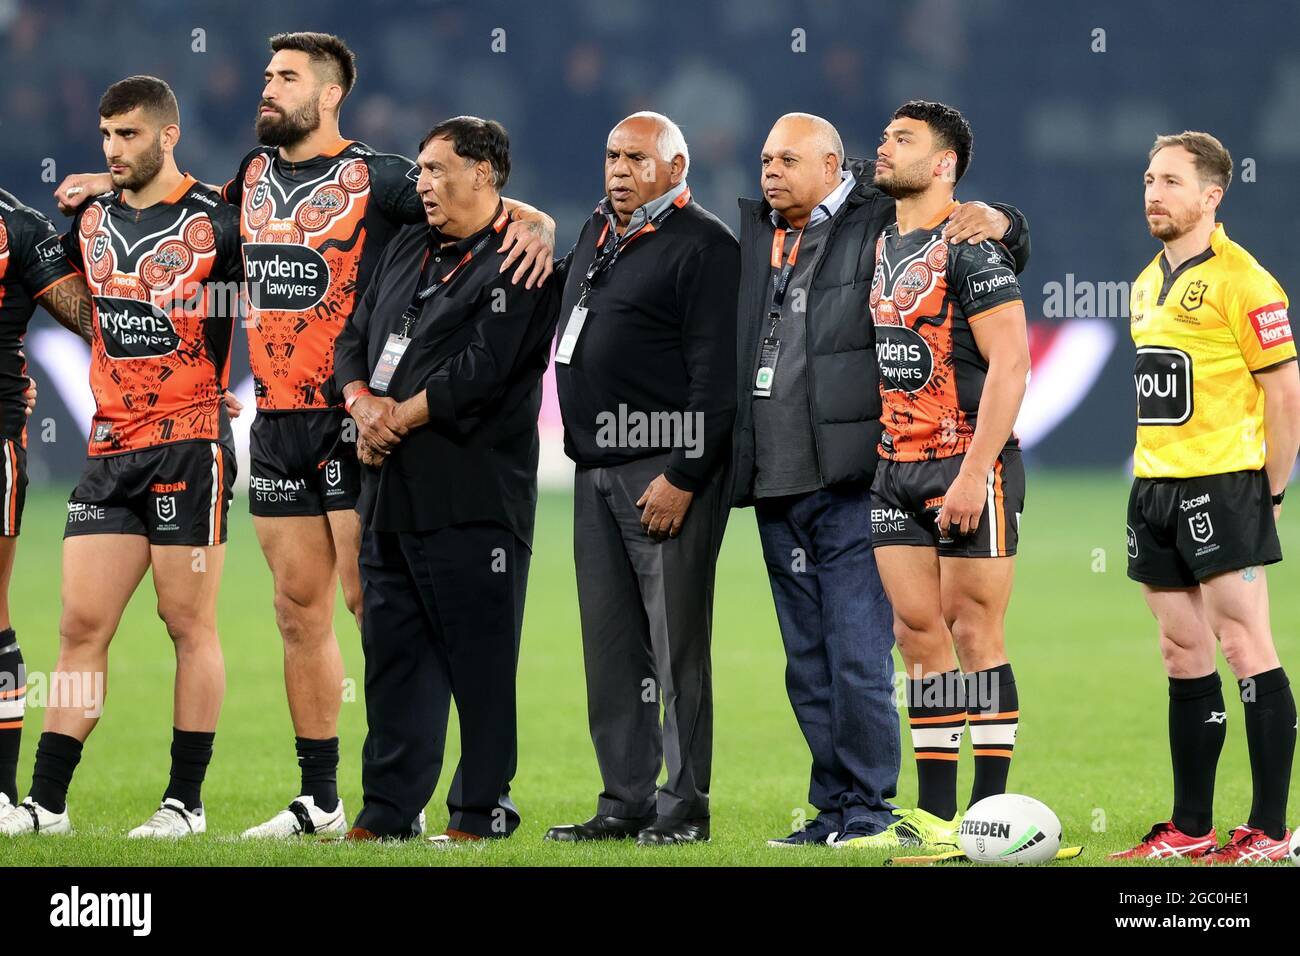 SYDNEY, AUSTRALIA MAY 28: Larry former Balmain indigenous legend Tigers players during the round twelve NRL match between the Wests Tigers and St George Illawarra Dragons at Stadium